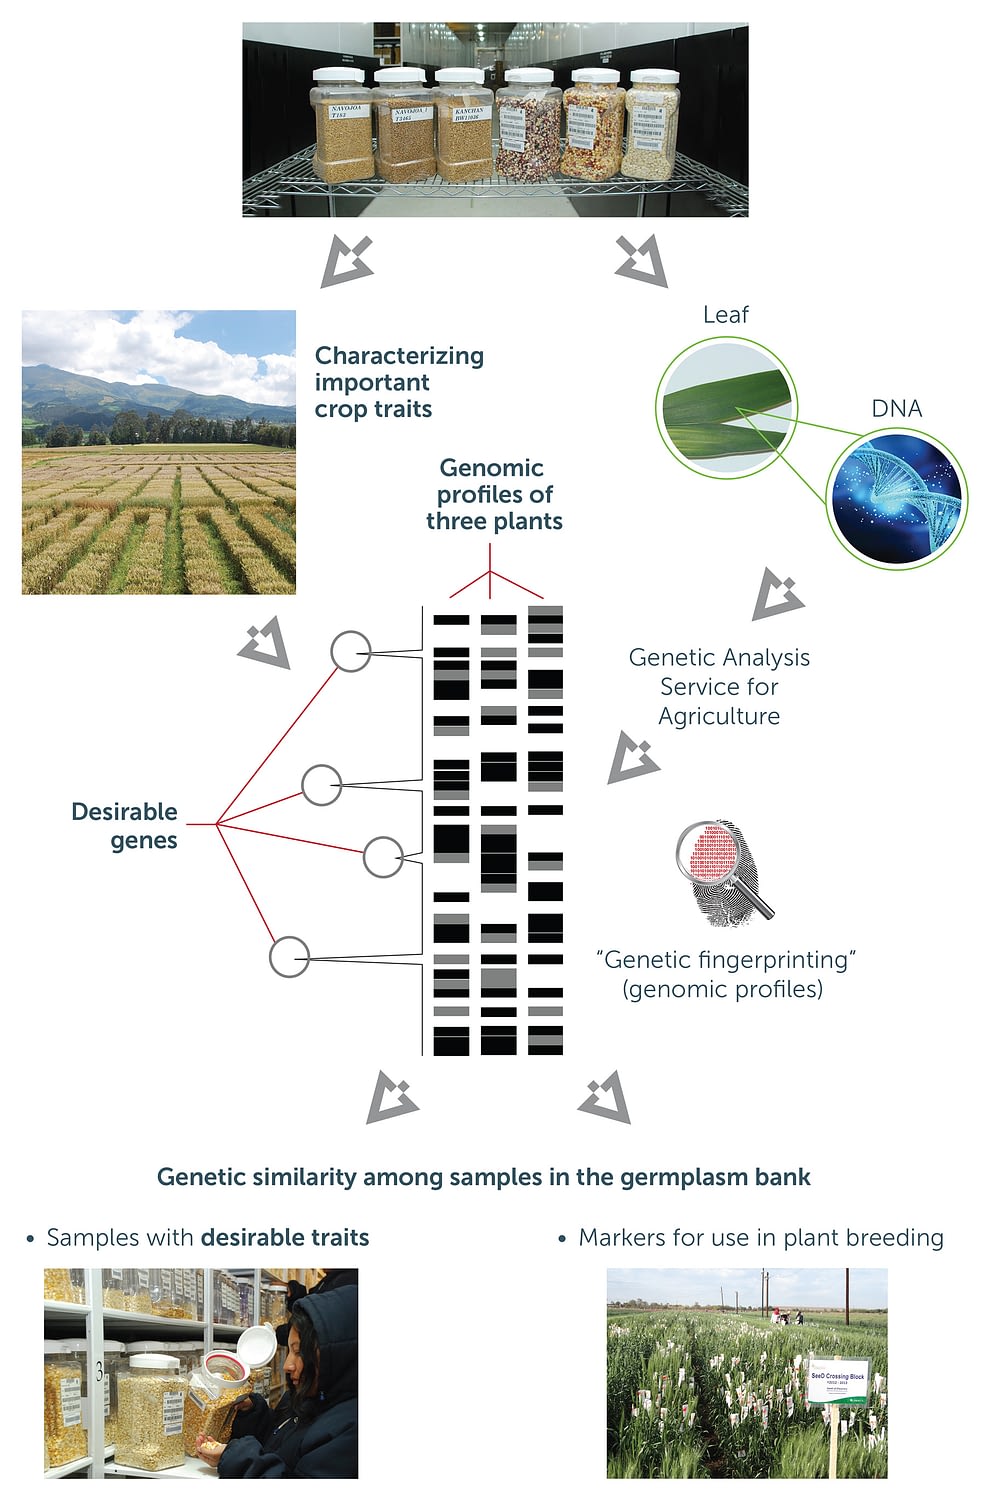 Harnessing genetic resources for the nutrition and well-being of current and future generations.